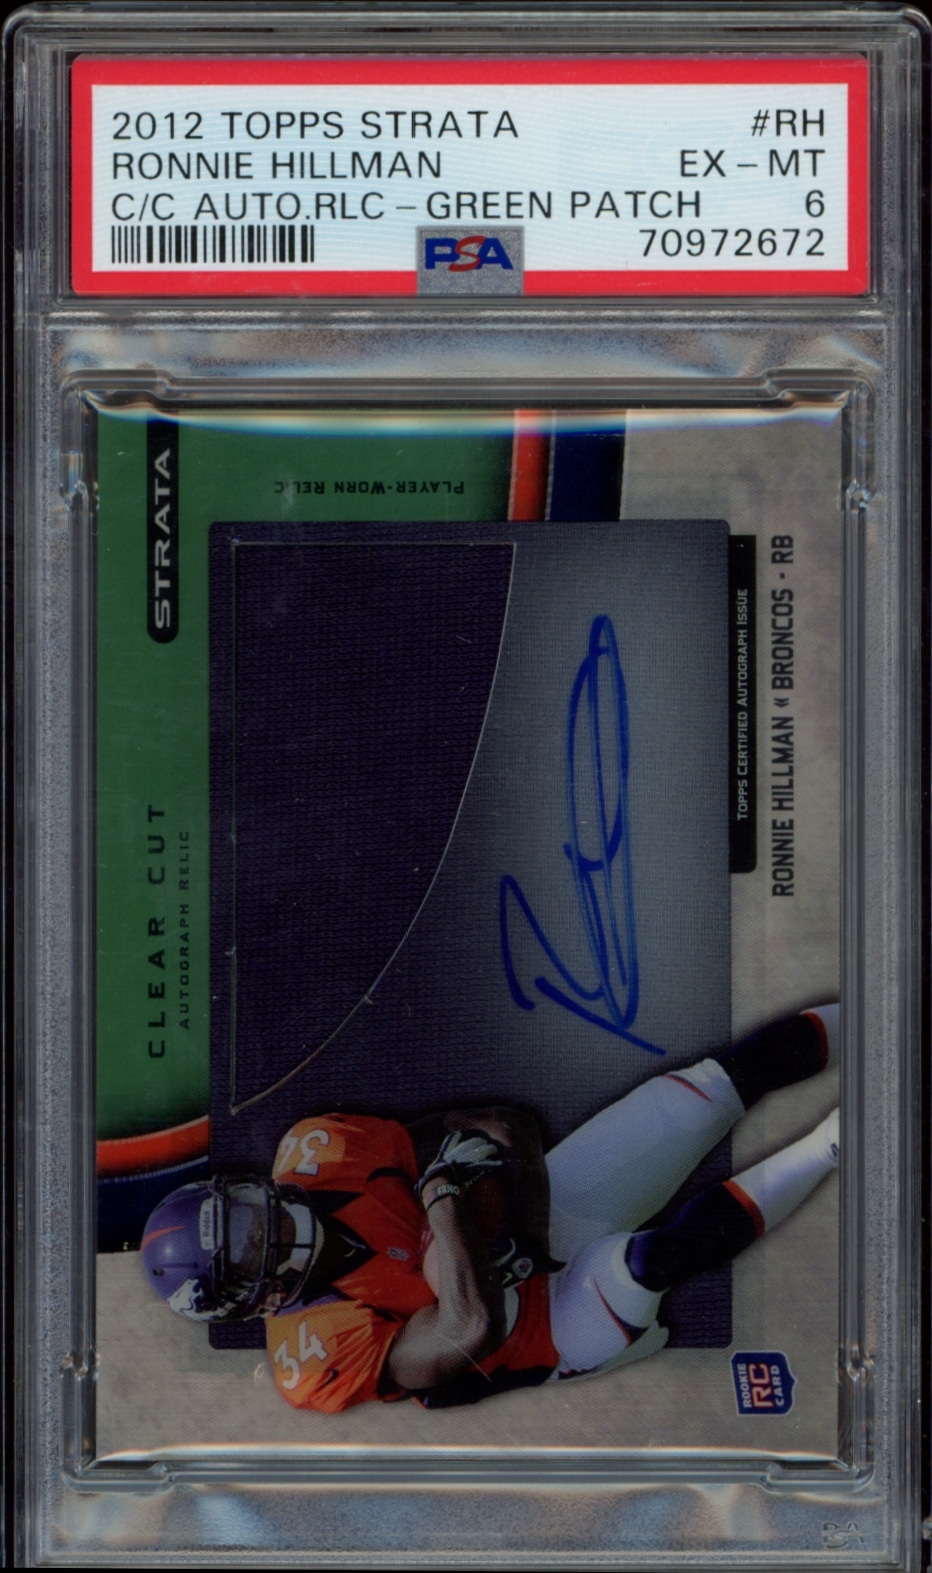 2012 Topps Strata Ronnie Hillman autographed rookie card with game-worn patch, PSA graded 6.